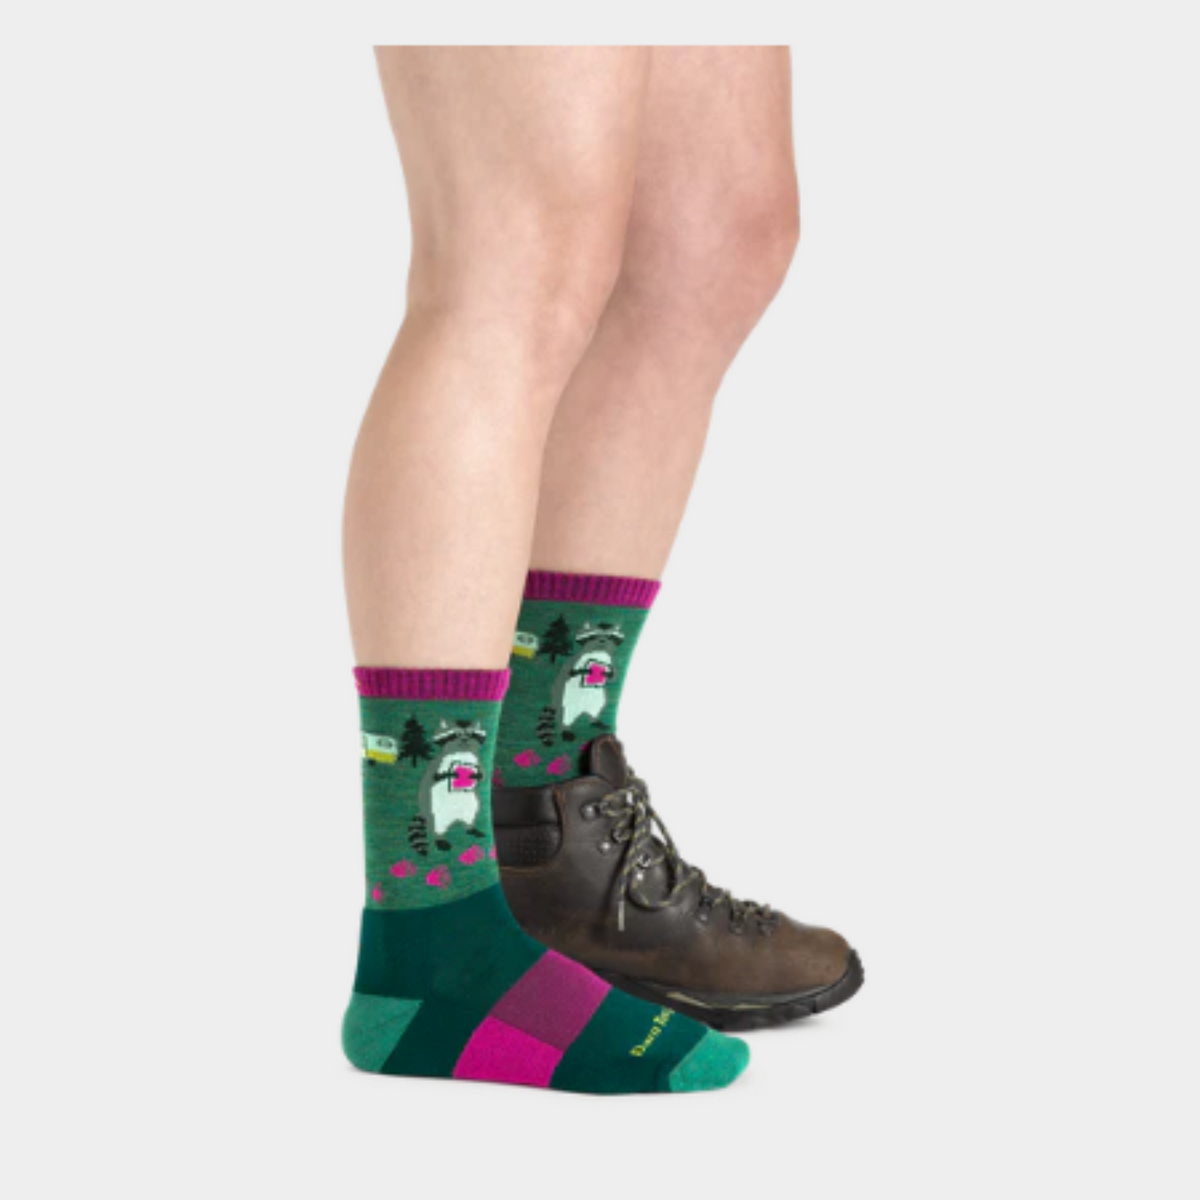 Darn Tough 5001 Critter Club Micro Crew Lightweight Hiking Women&#39;s Sock featuring green sock with purple cuff and raccoon holding jam sandwich. Sock shown on model wearing one boot. 